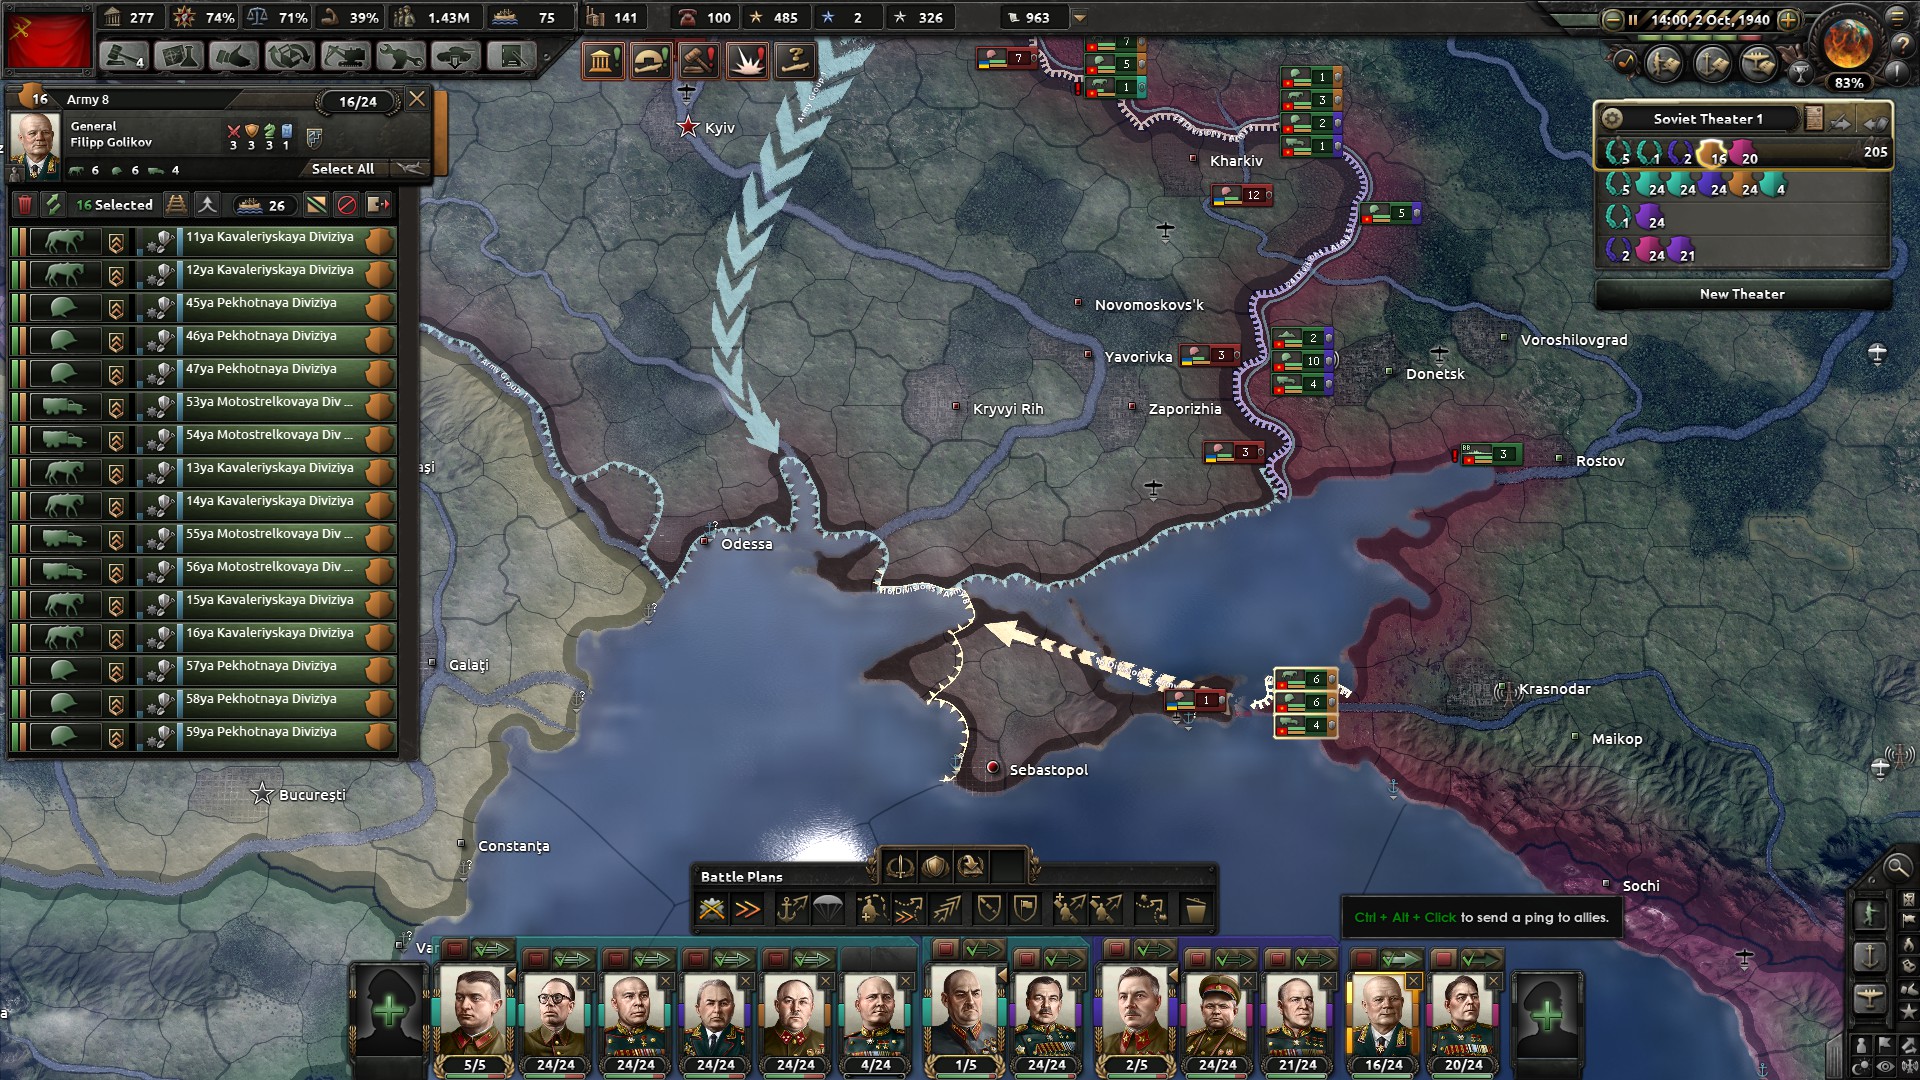 HOI4 - Attack on Titan mod for Hearts of Iron IV - ModDB